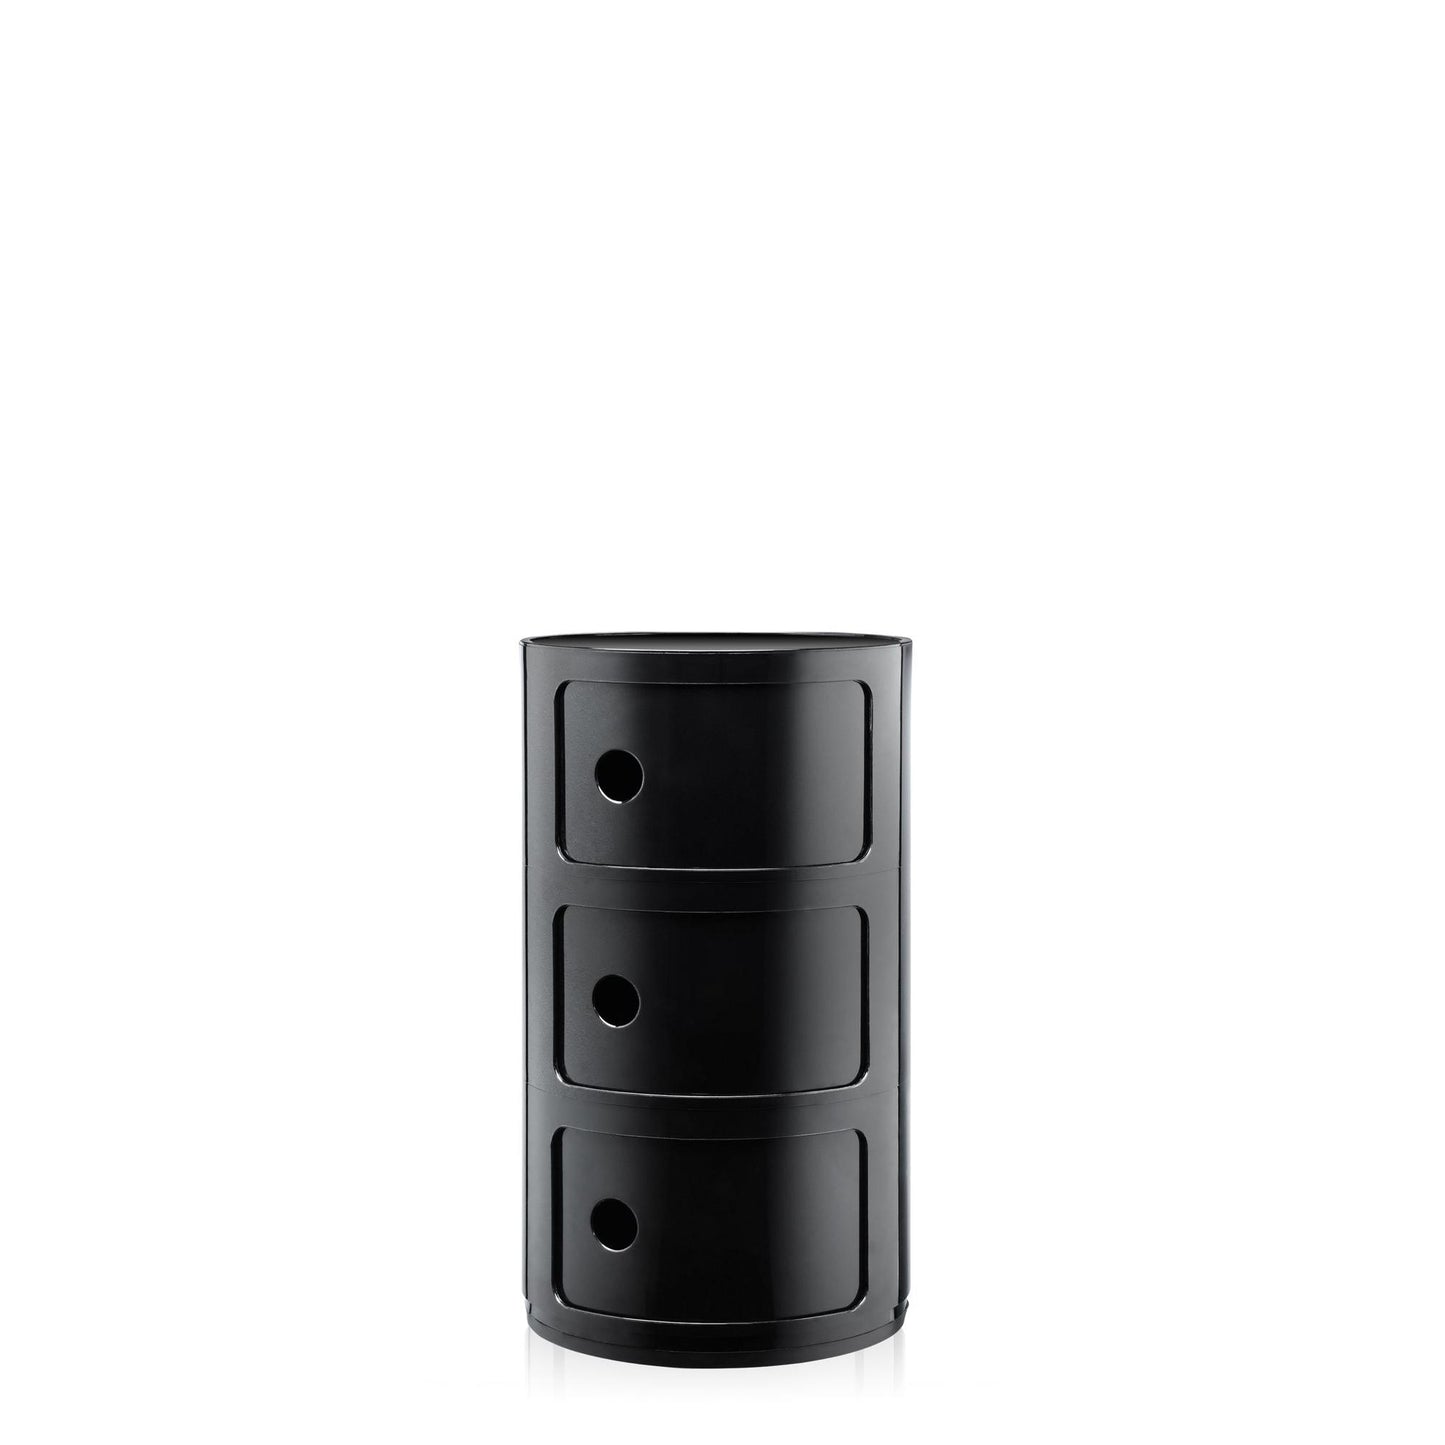 Componibili 3 Cabinet by Kartell #Black